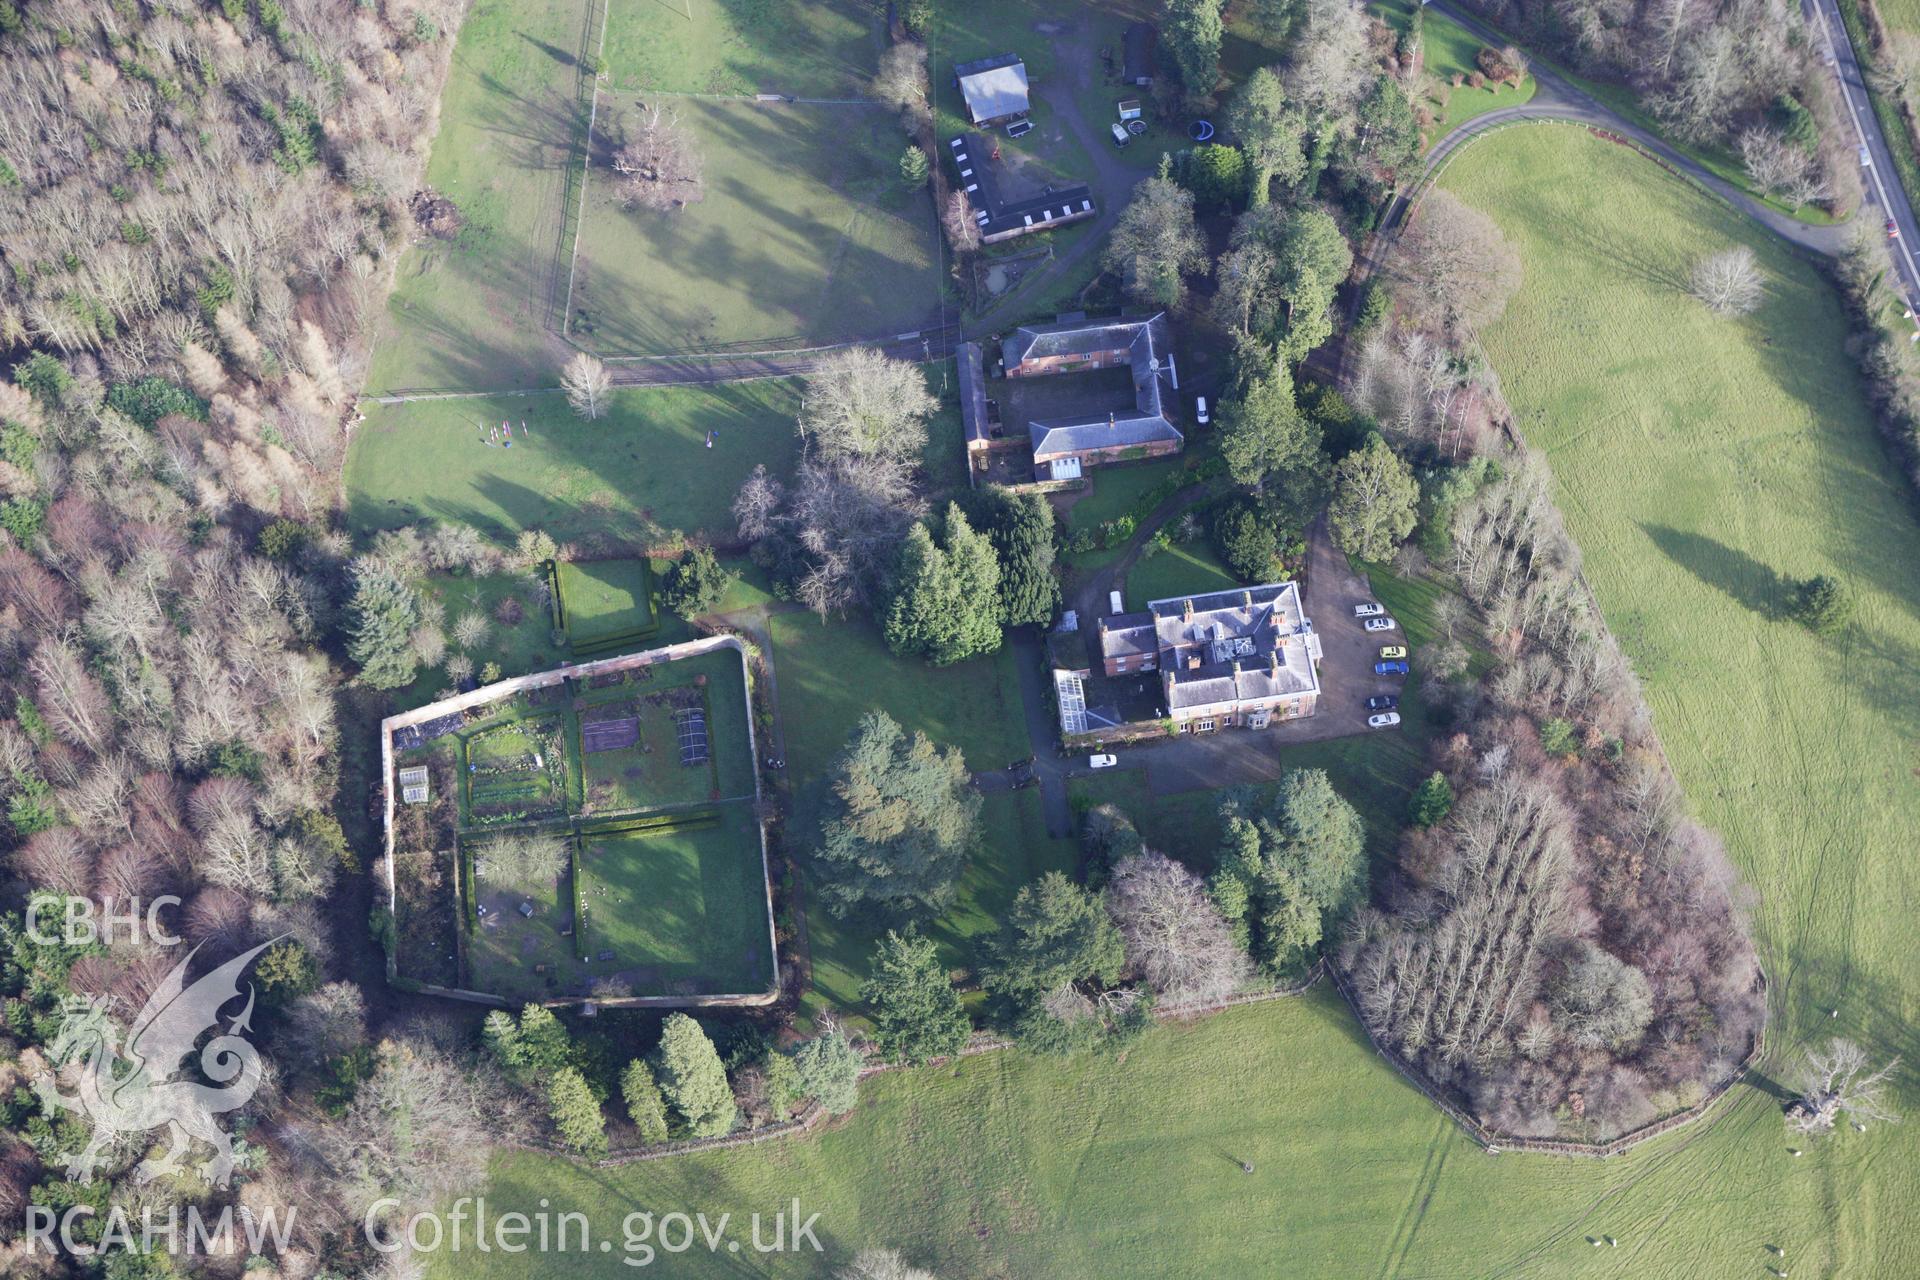 RCAHMW colour oblique aerial photograph of Garthmyl Hall. Taken on 10 December 2009 by Toby Driver